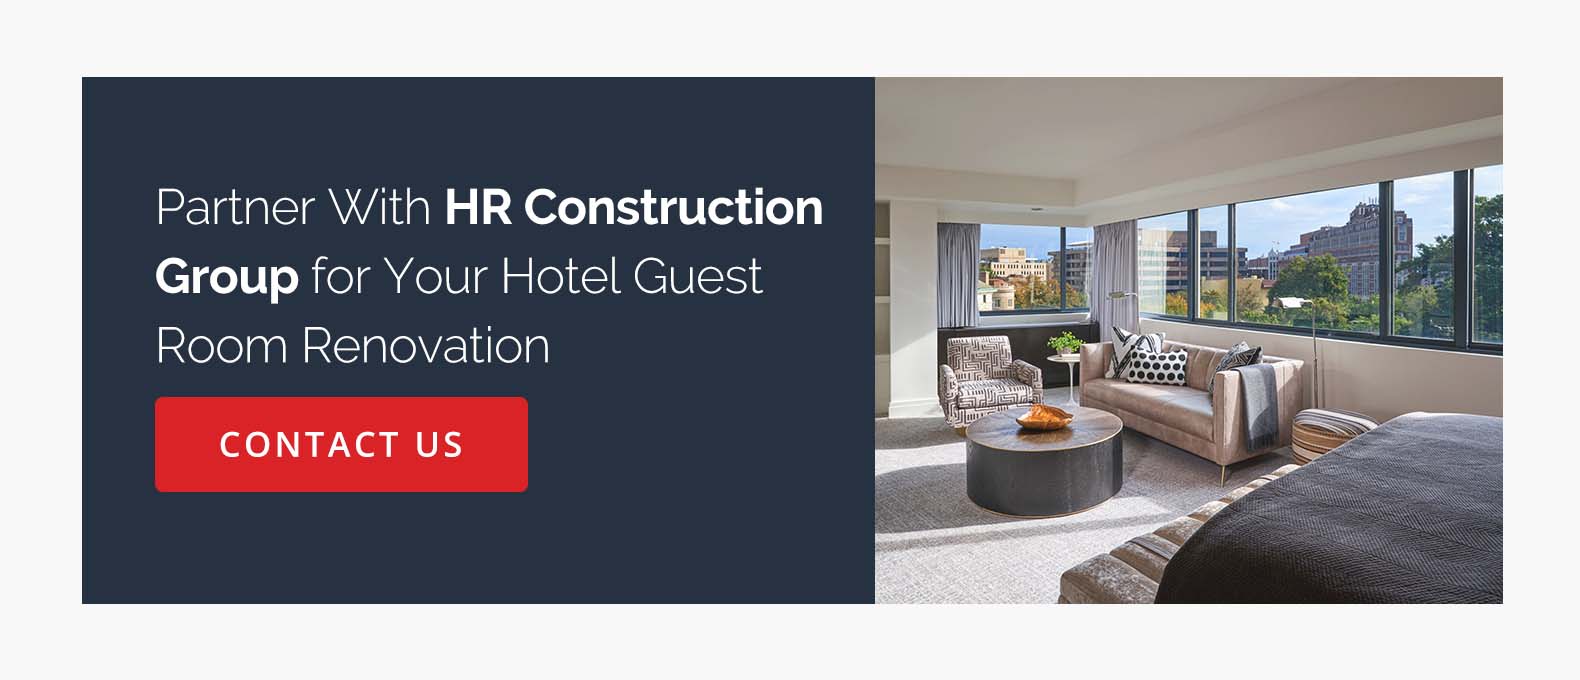 Partner With HR Construction Group for Your Hotel Guest Room Renovation